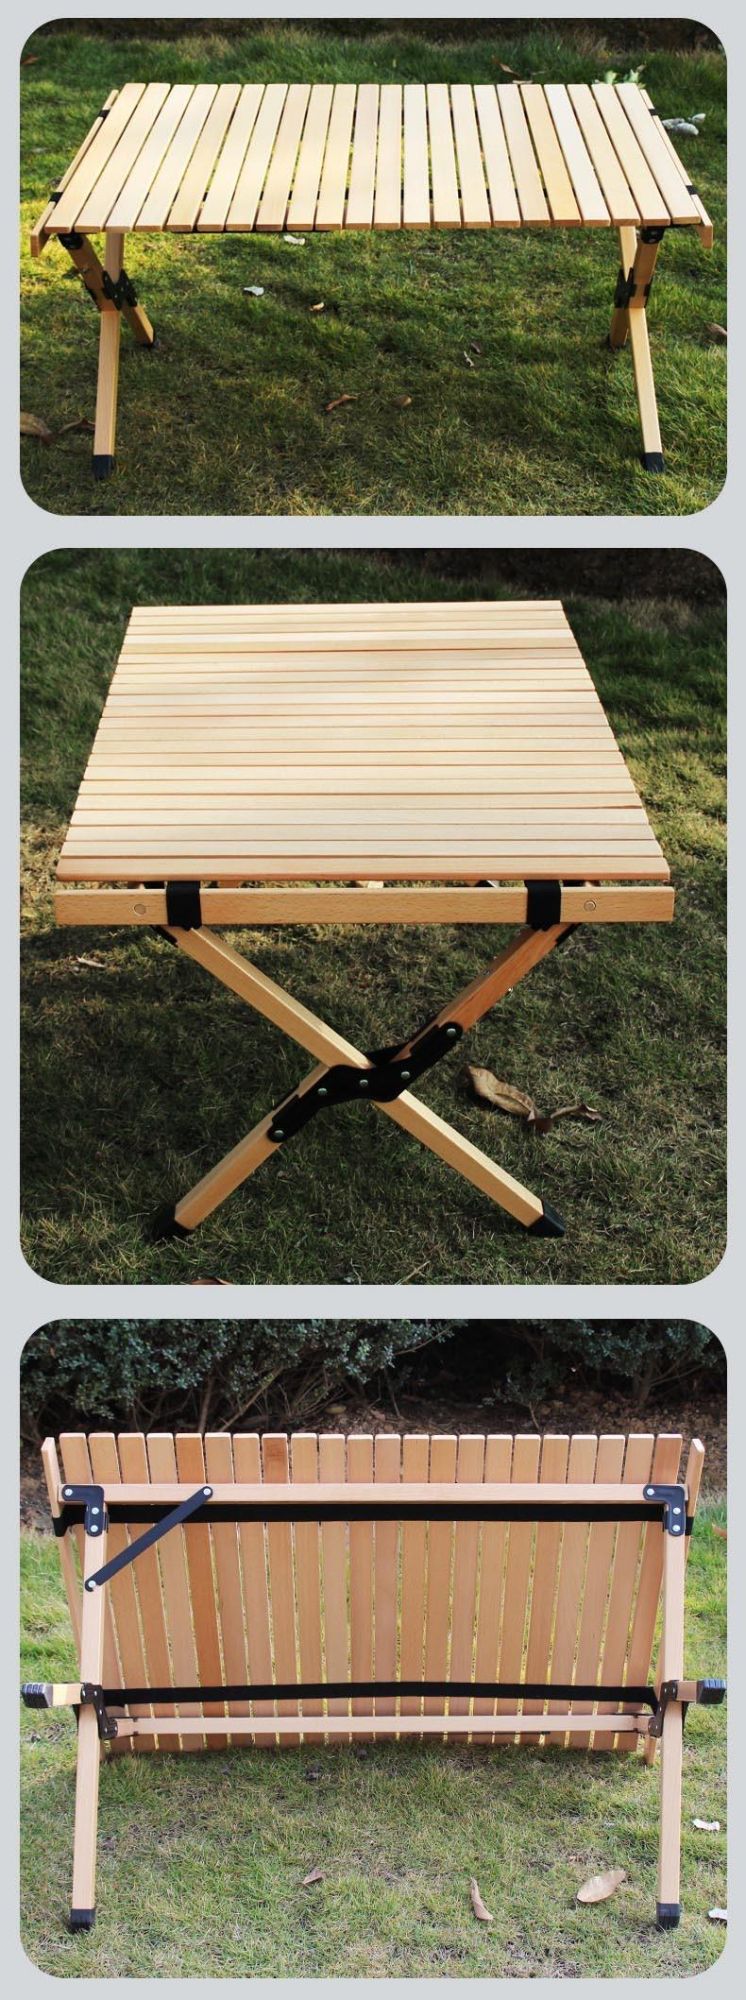 Outdoor Camping Egg Roll Wooden Top Table Iron Frame Portable Folding Table with Storage Bag Egg Roll Table